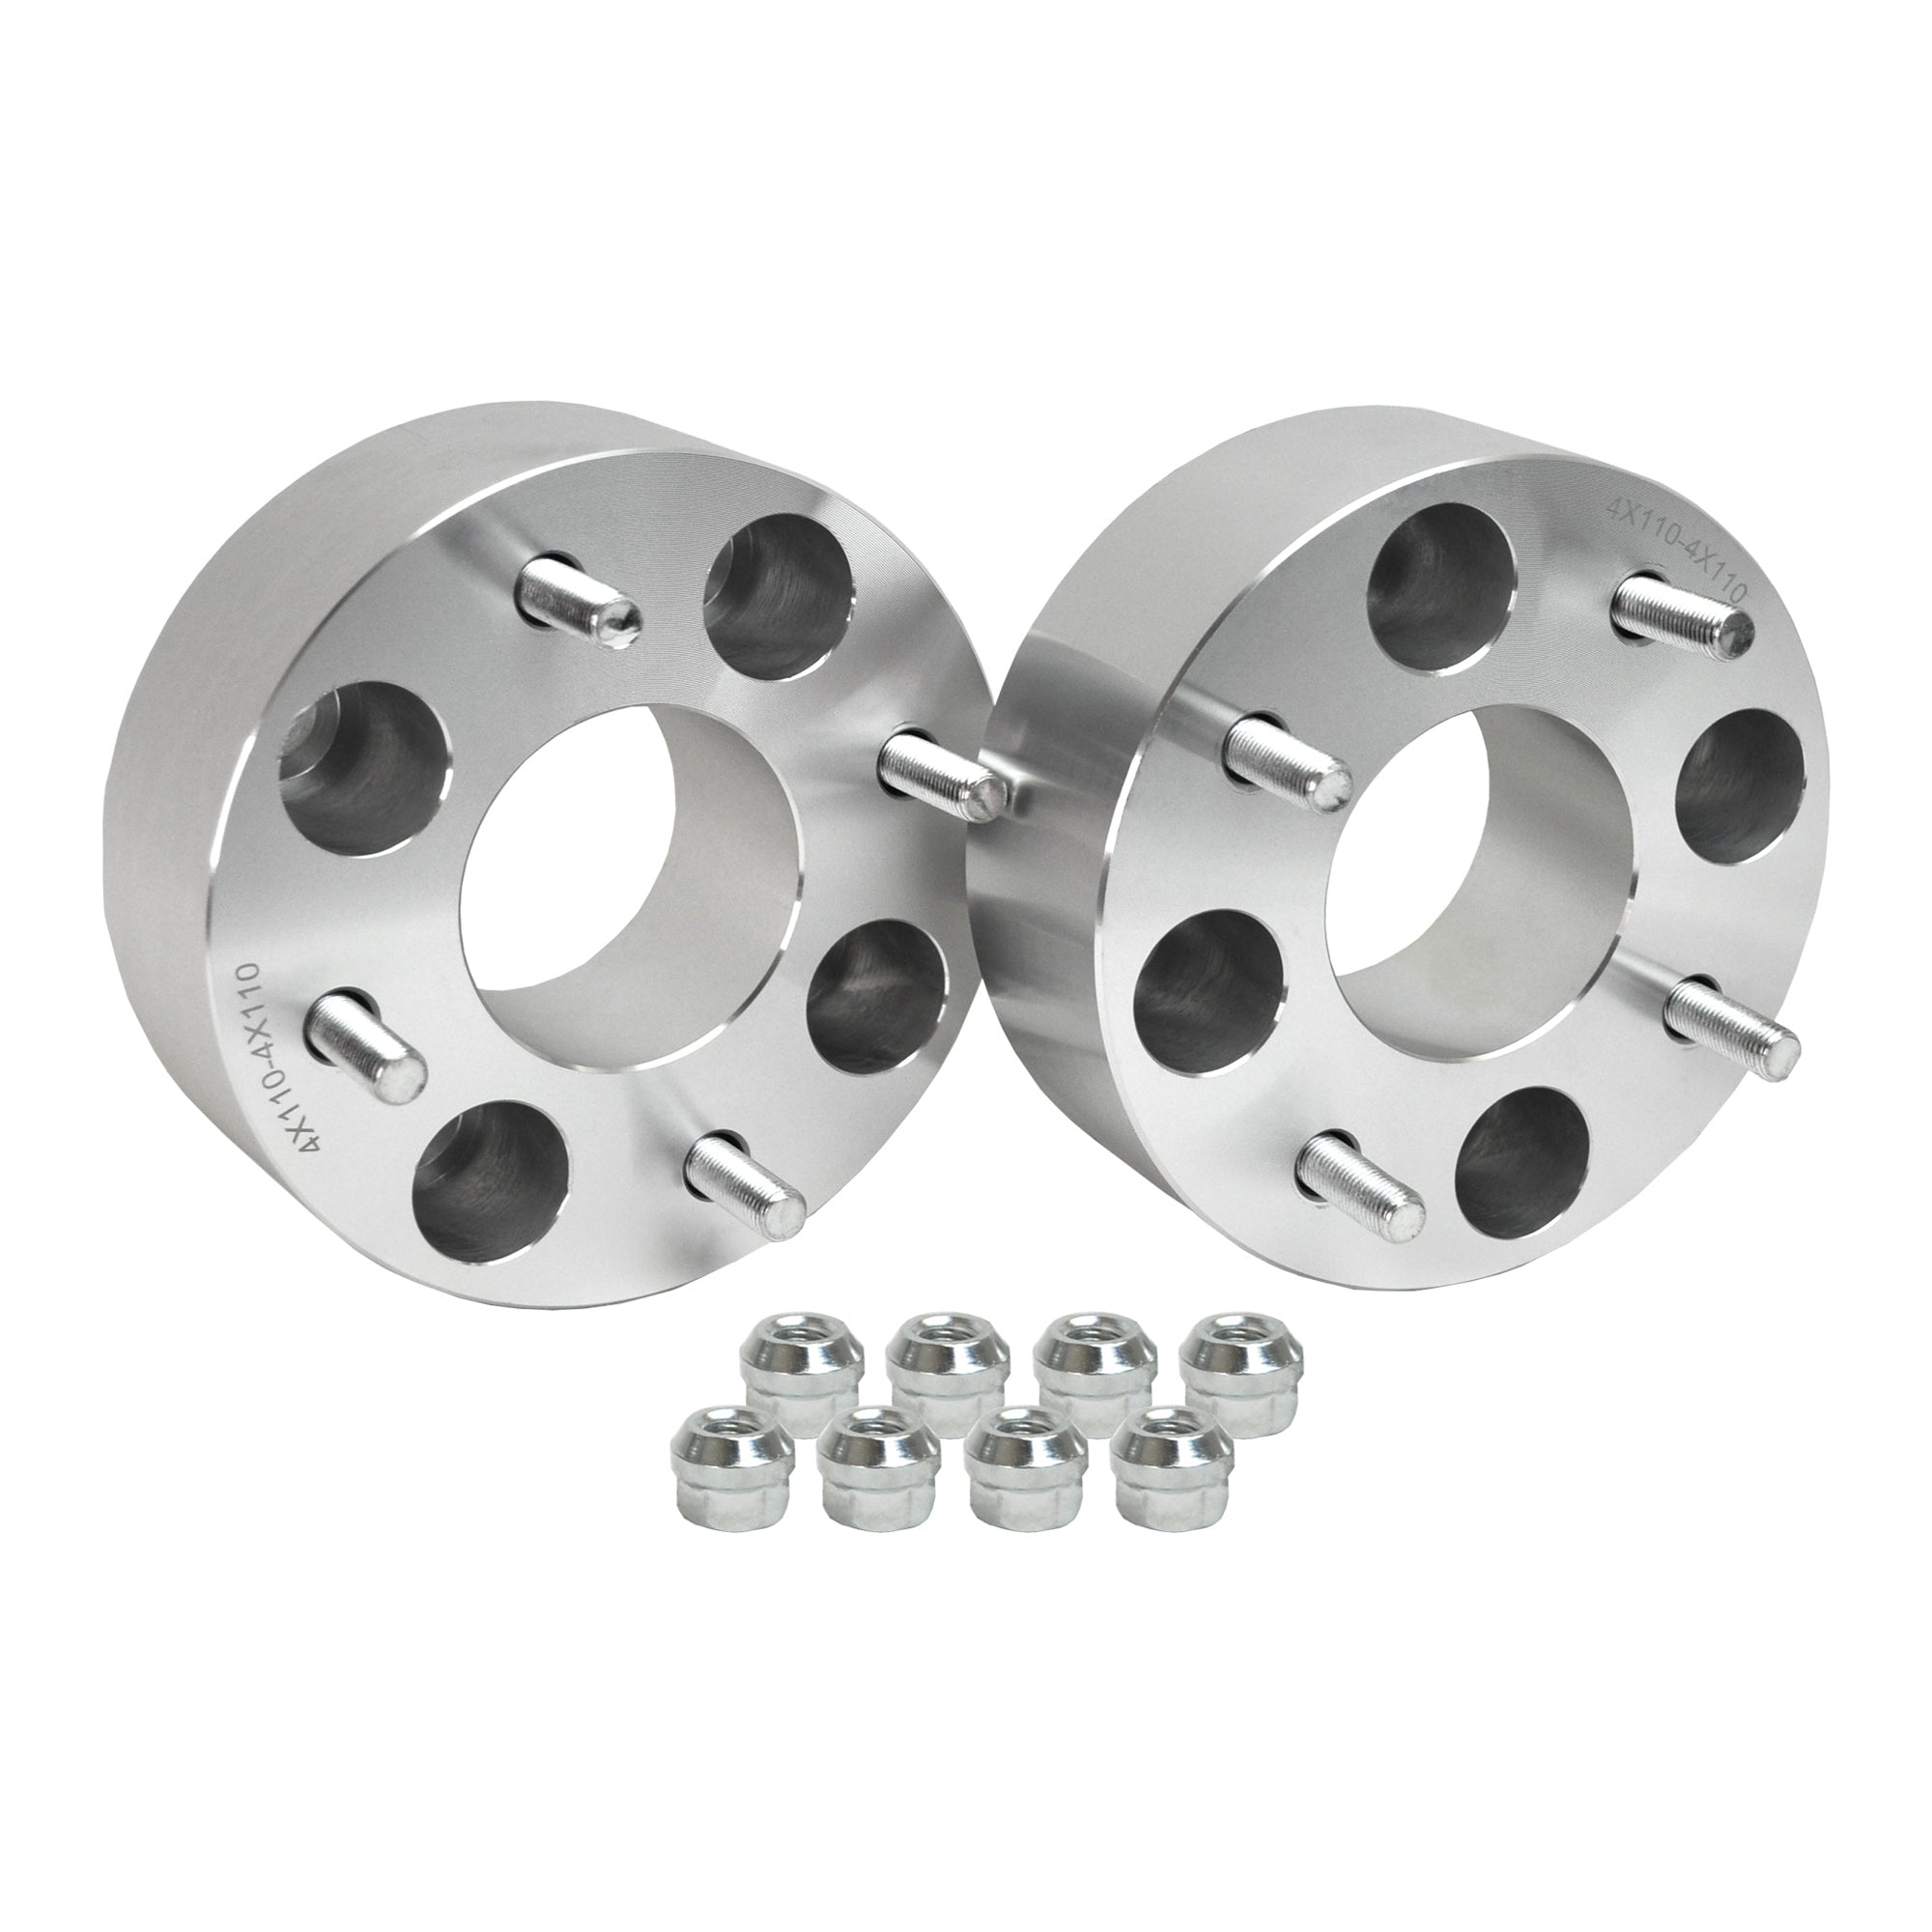 Wheel Spacer for Arctic Cat Prowler 700 